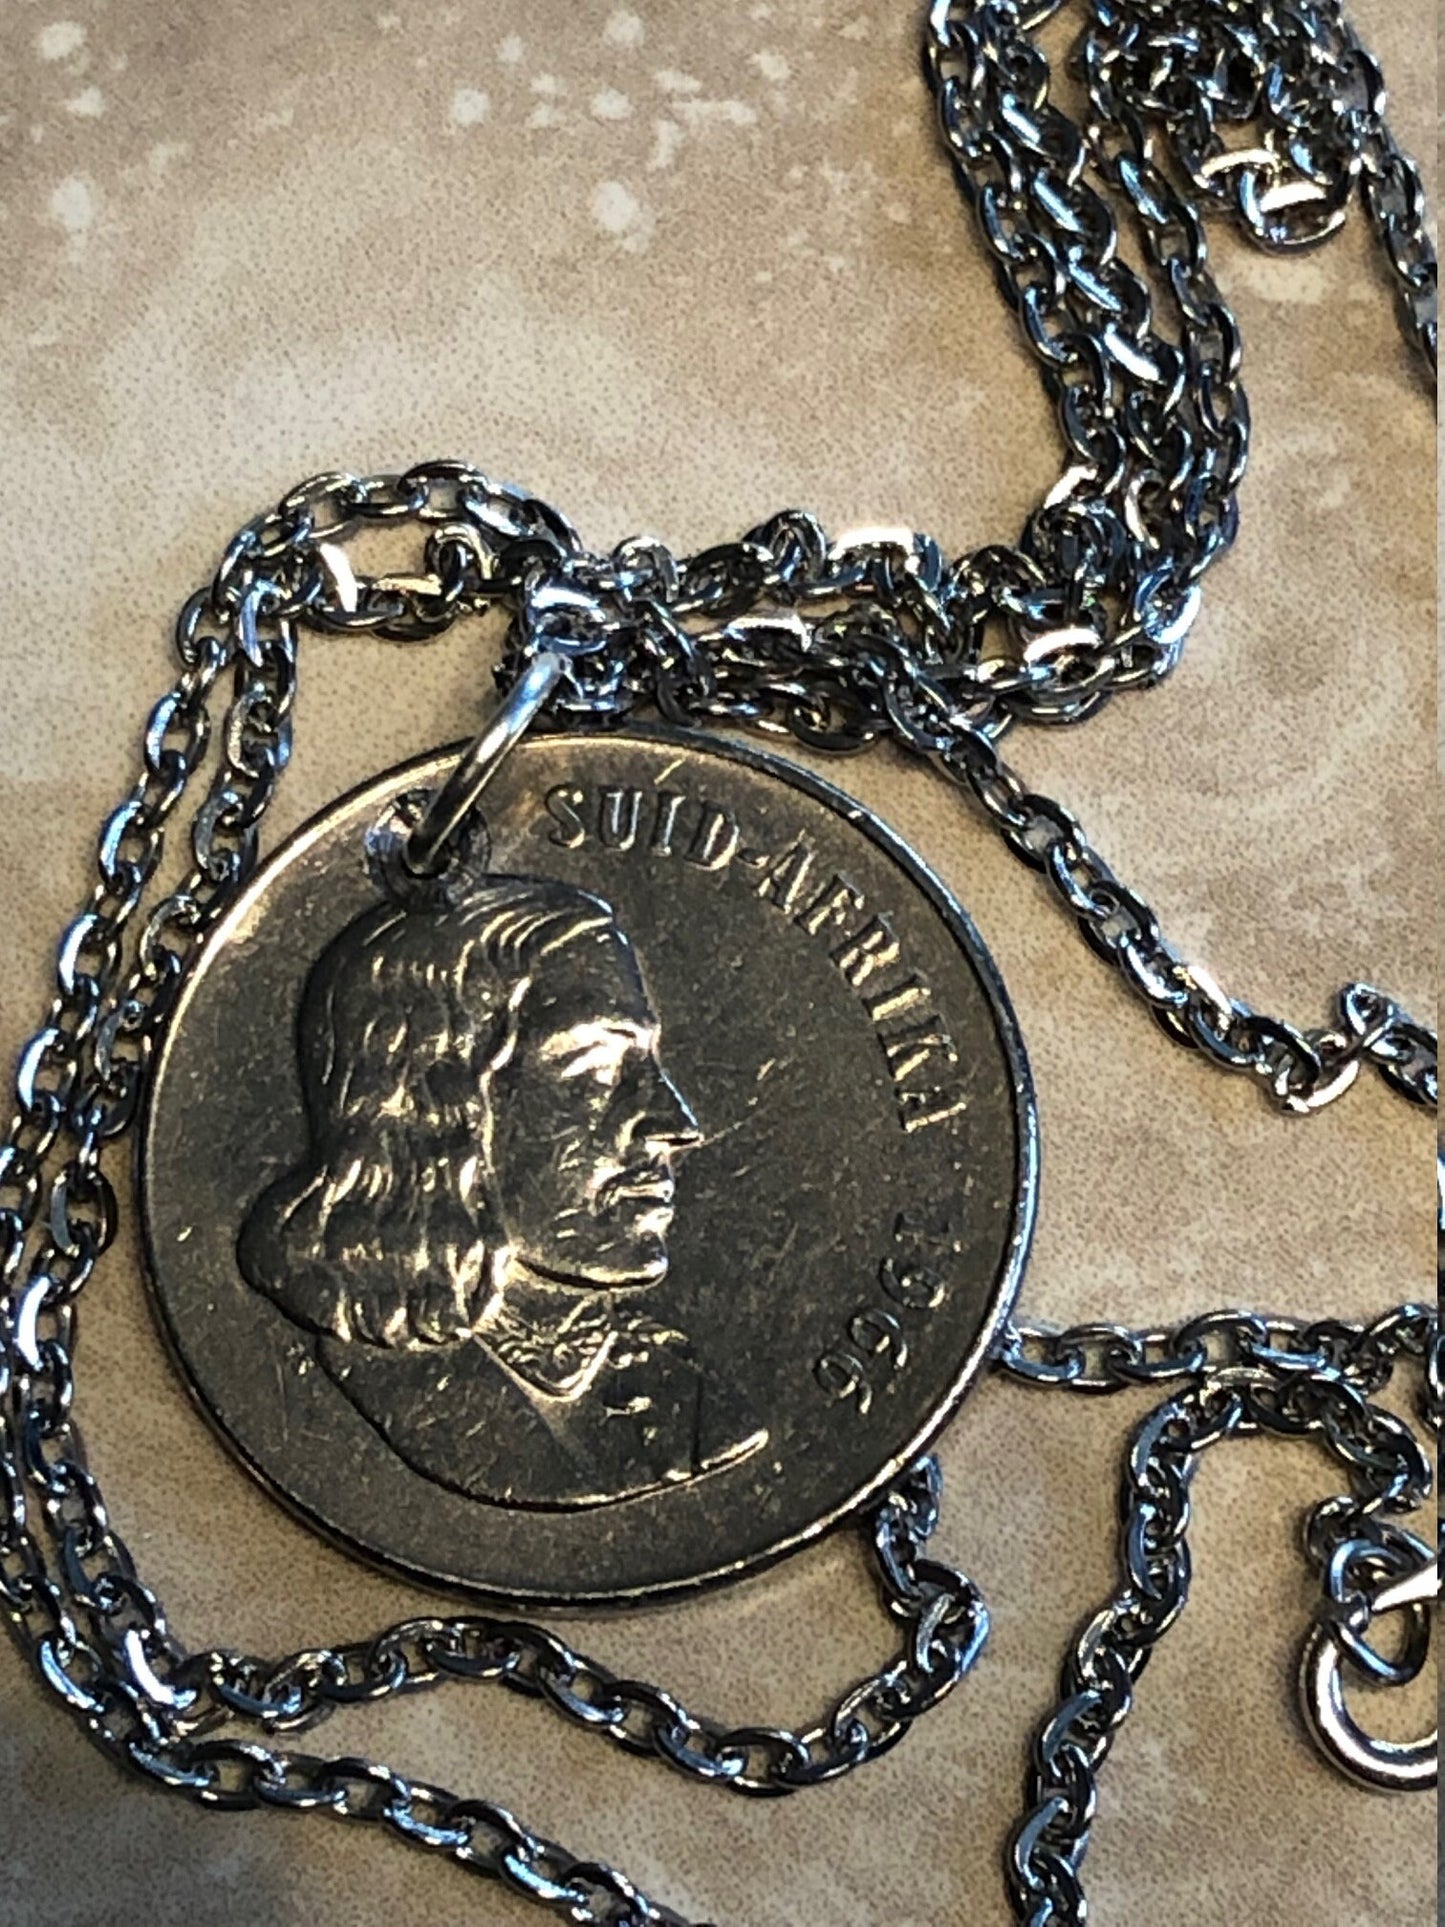 South Africa Coin Necklace 50 Cents African Pendant Personal Old Vintage Handmade Jewelry Gift Friend Charm For Him Her World Coin Collector